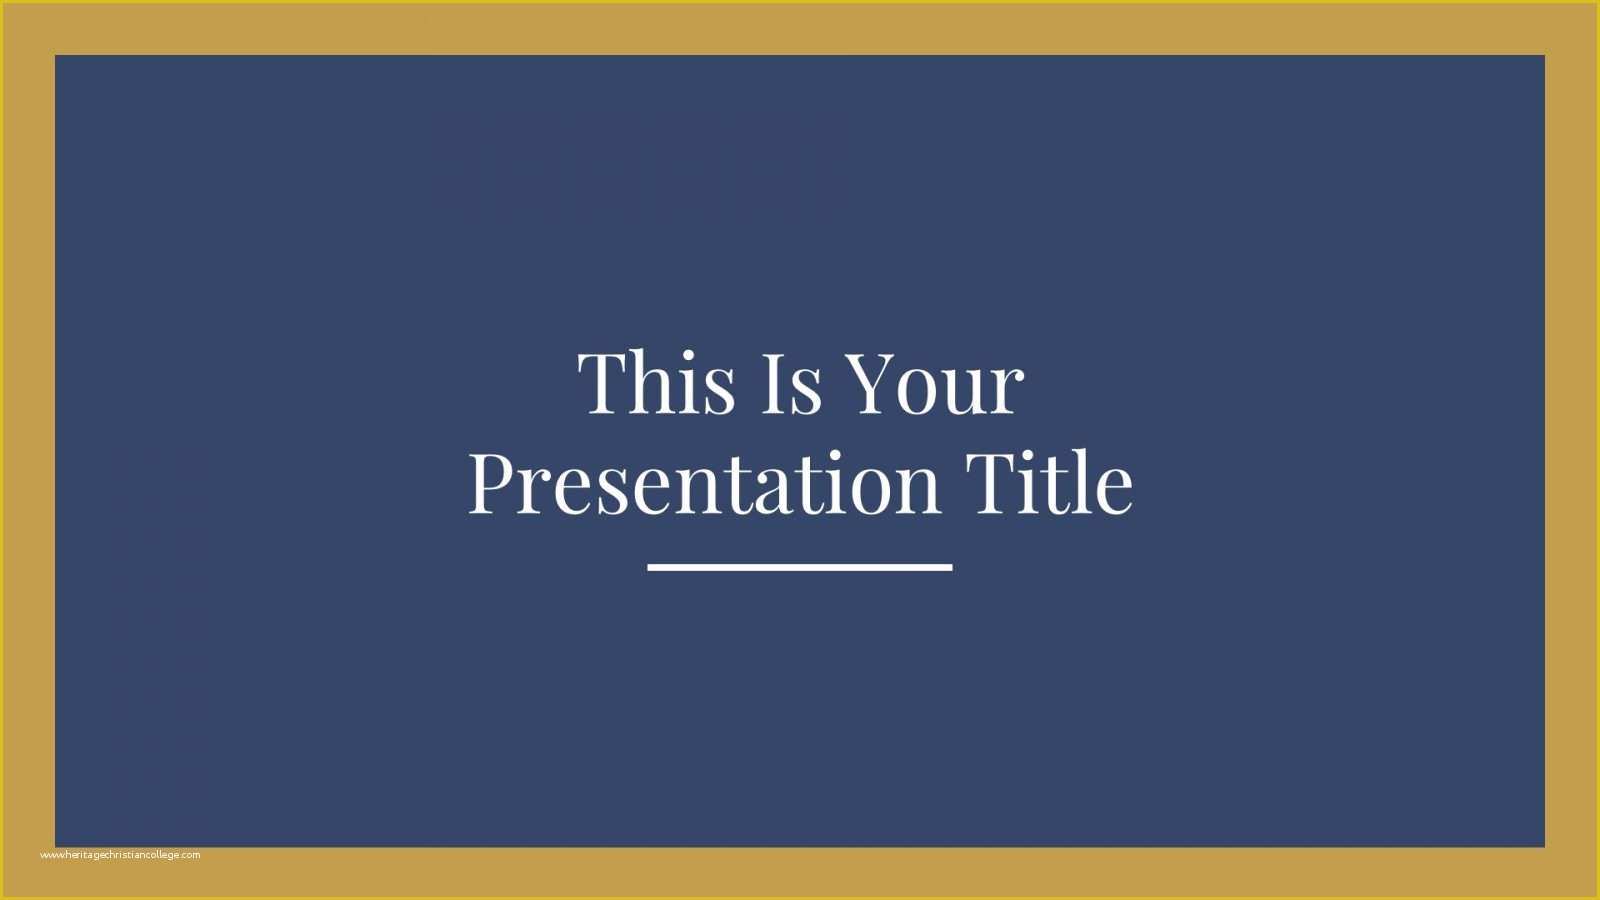 Free Powerpoint Slide Templates Of Blue and Gold Elegance Free Powerpoint Template